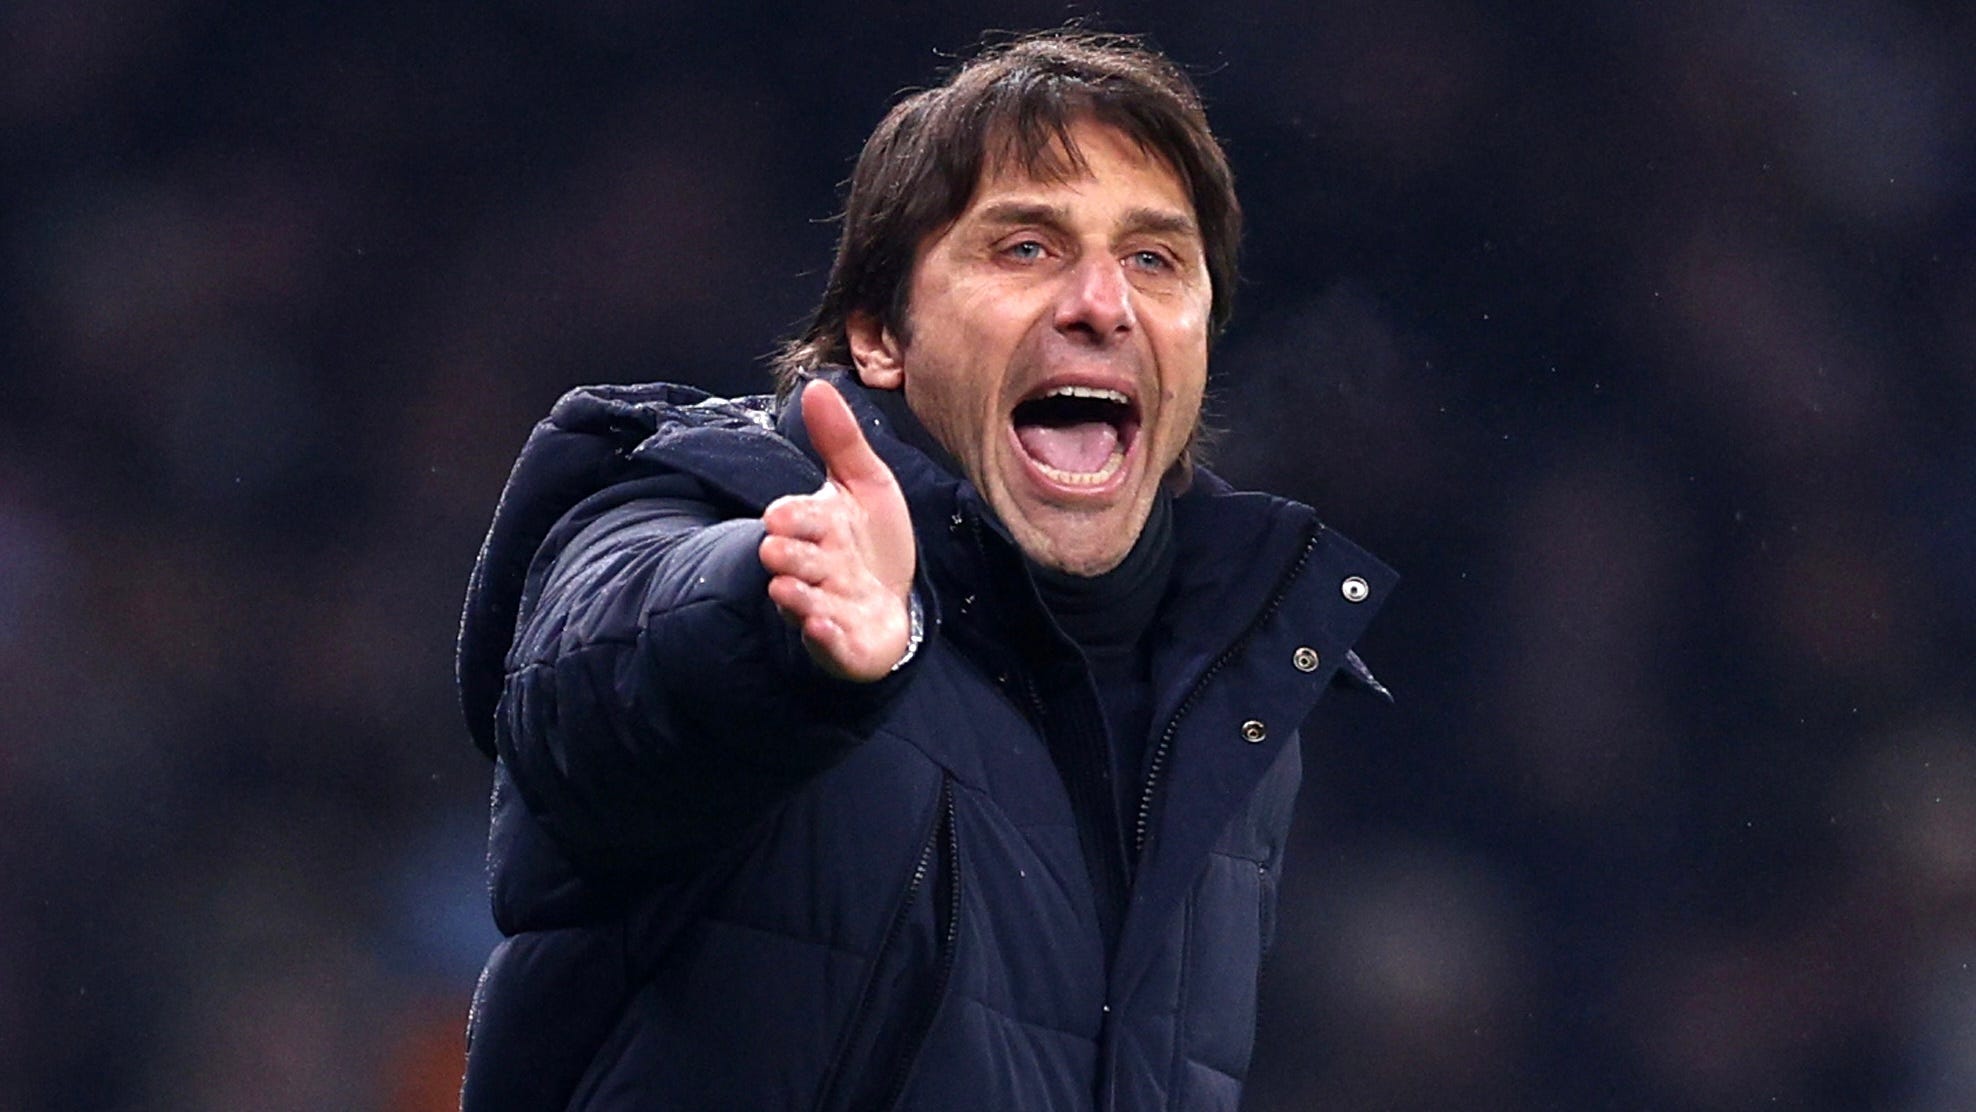 Antonio Conte wants to manage club that has 'recently won' as he fires dig  at Tottenham